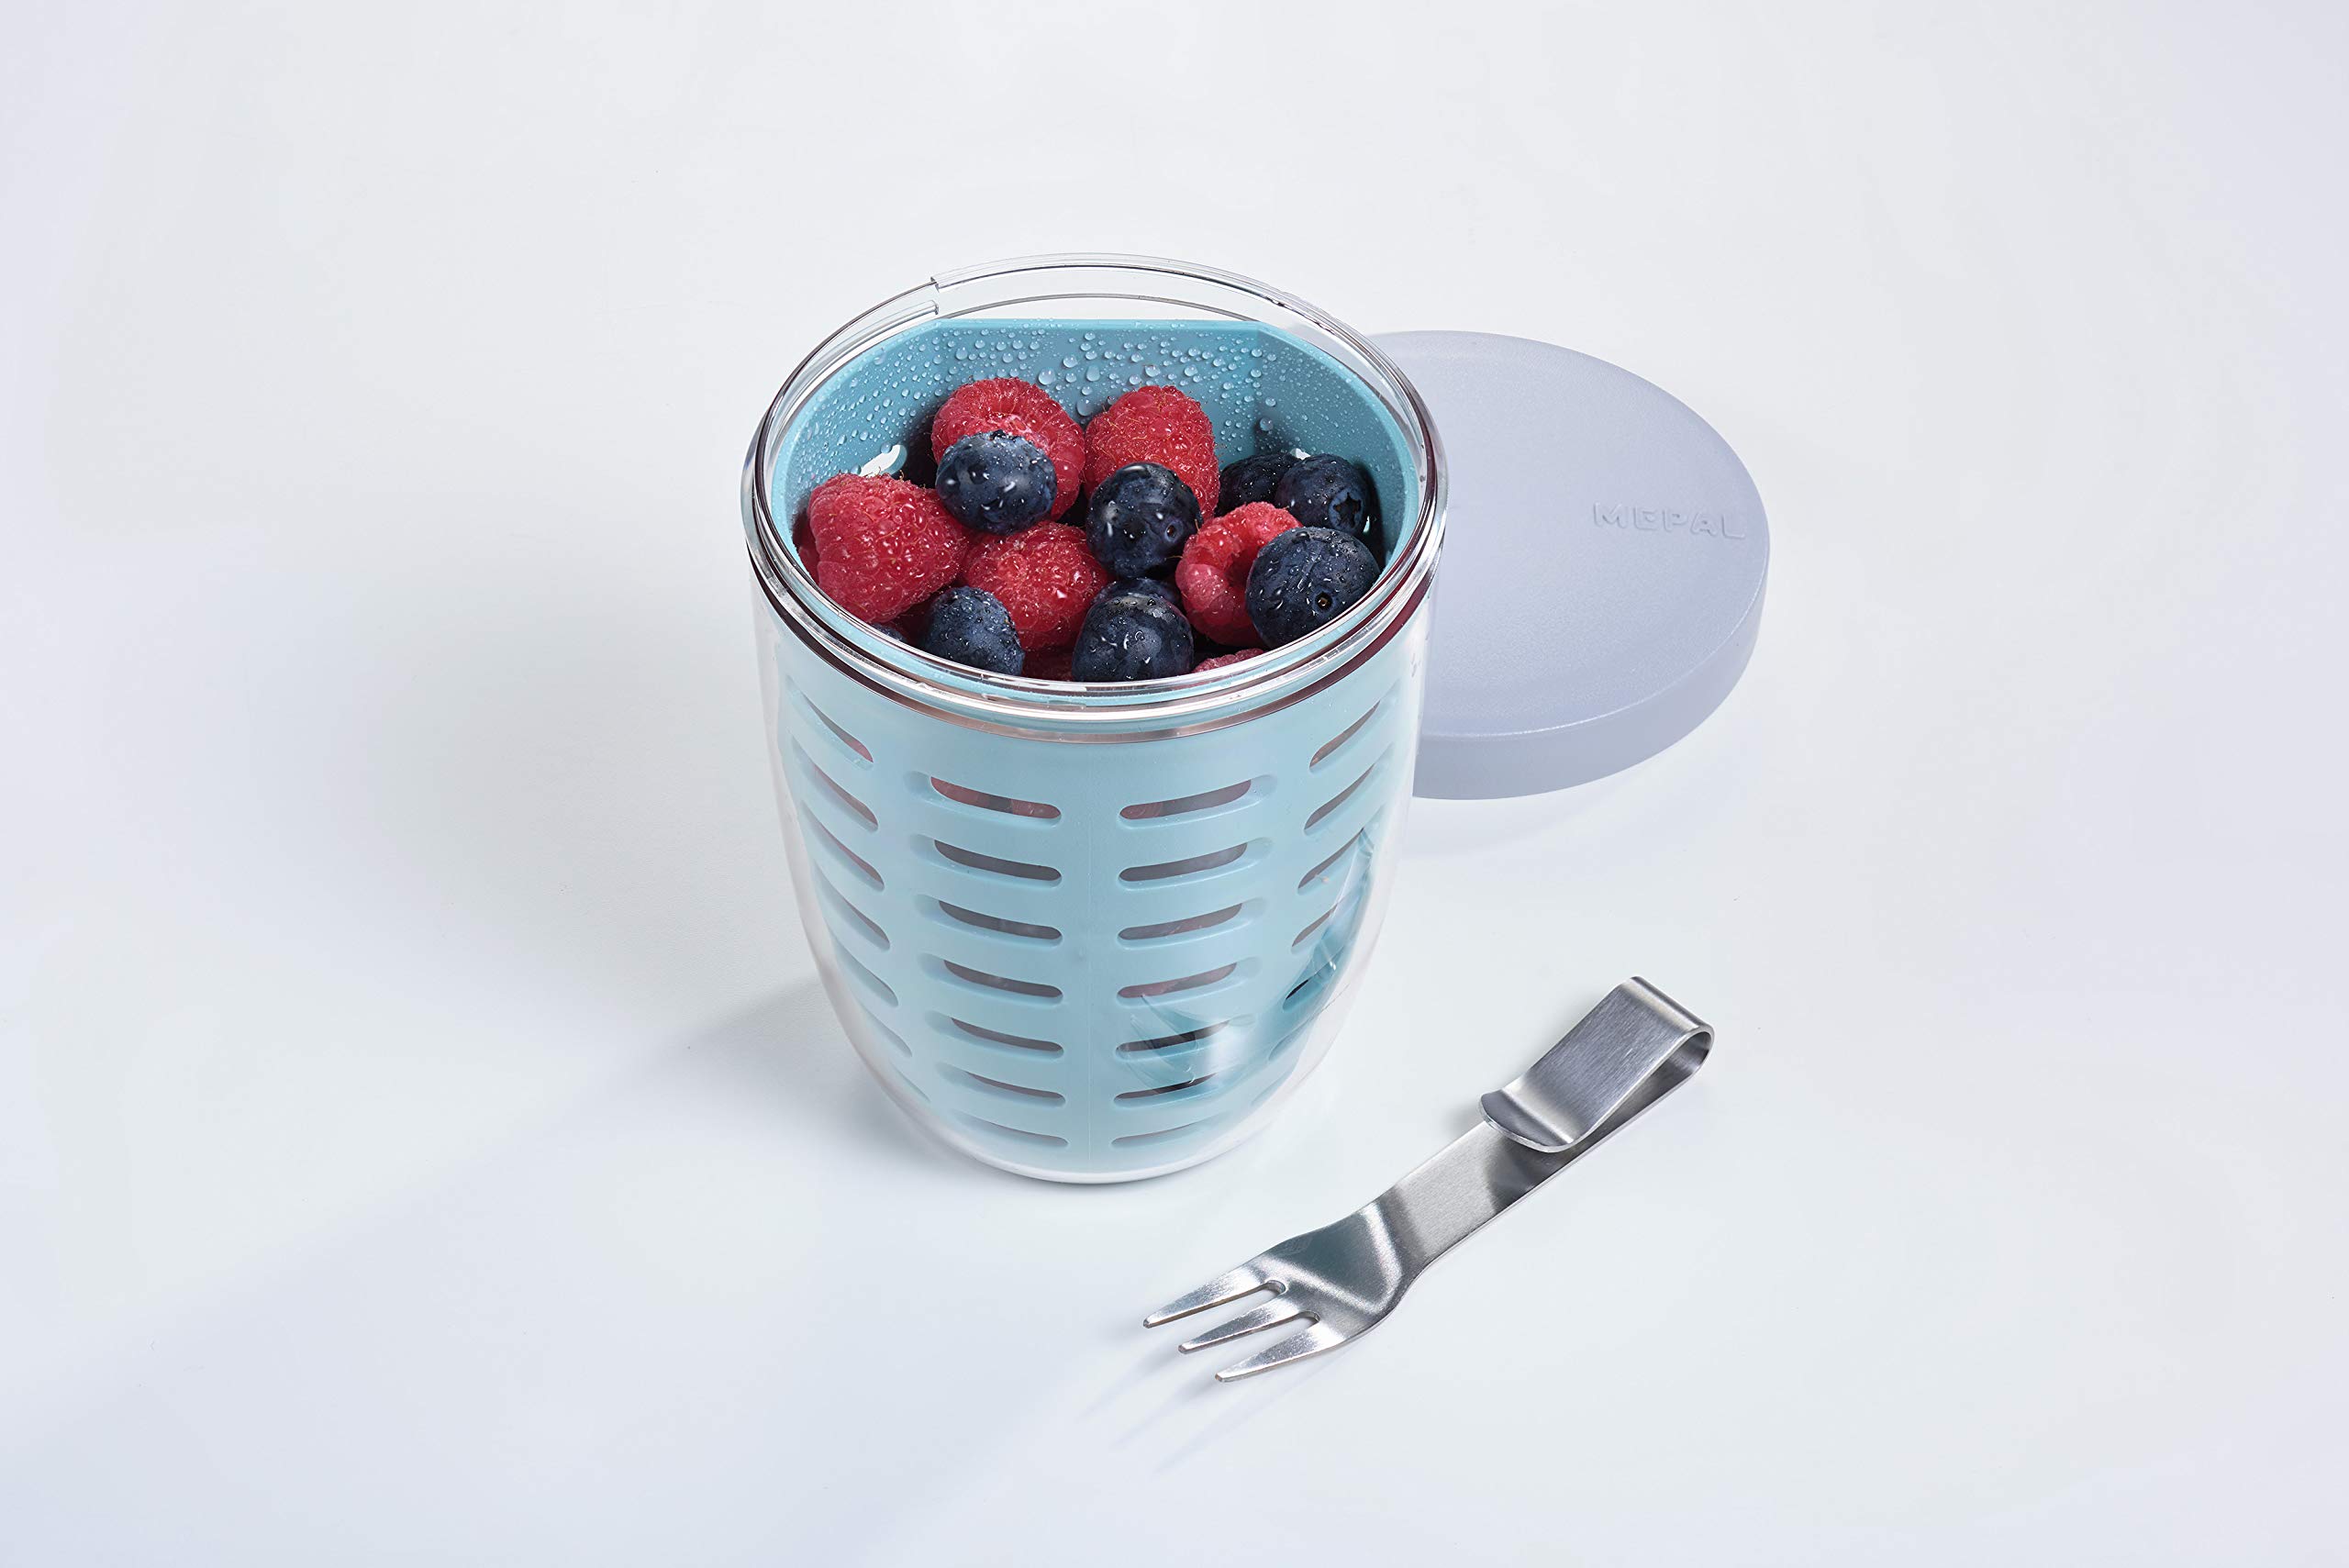 MEPAL, Fruit and Veggie Snack Pot with Airtight Lid, Colander and Fork, Portable, BPA Free, Nordic Blue, Holds 600ml|20oz, 1 Count